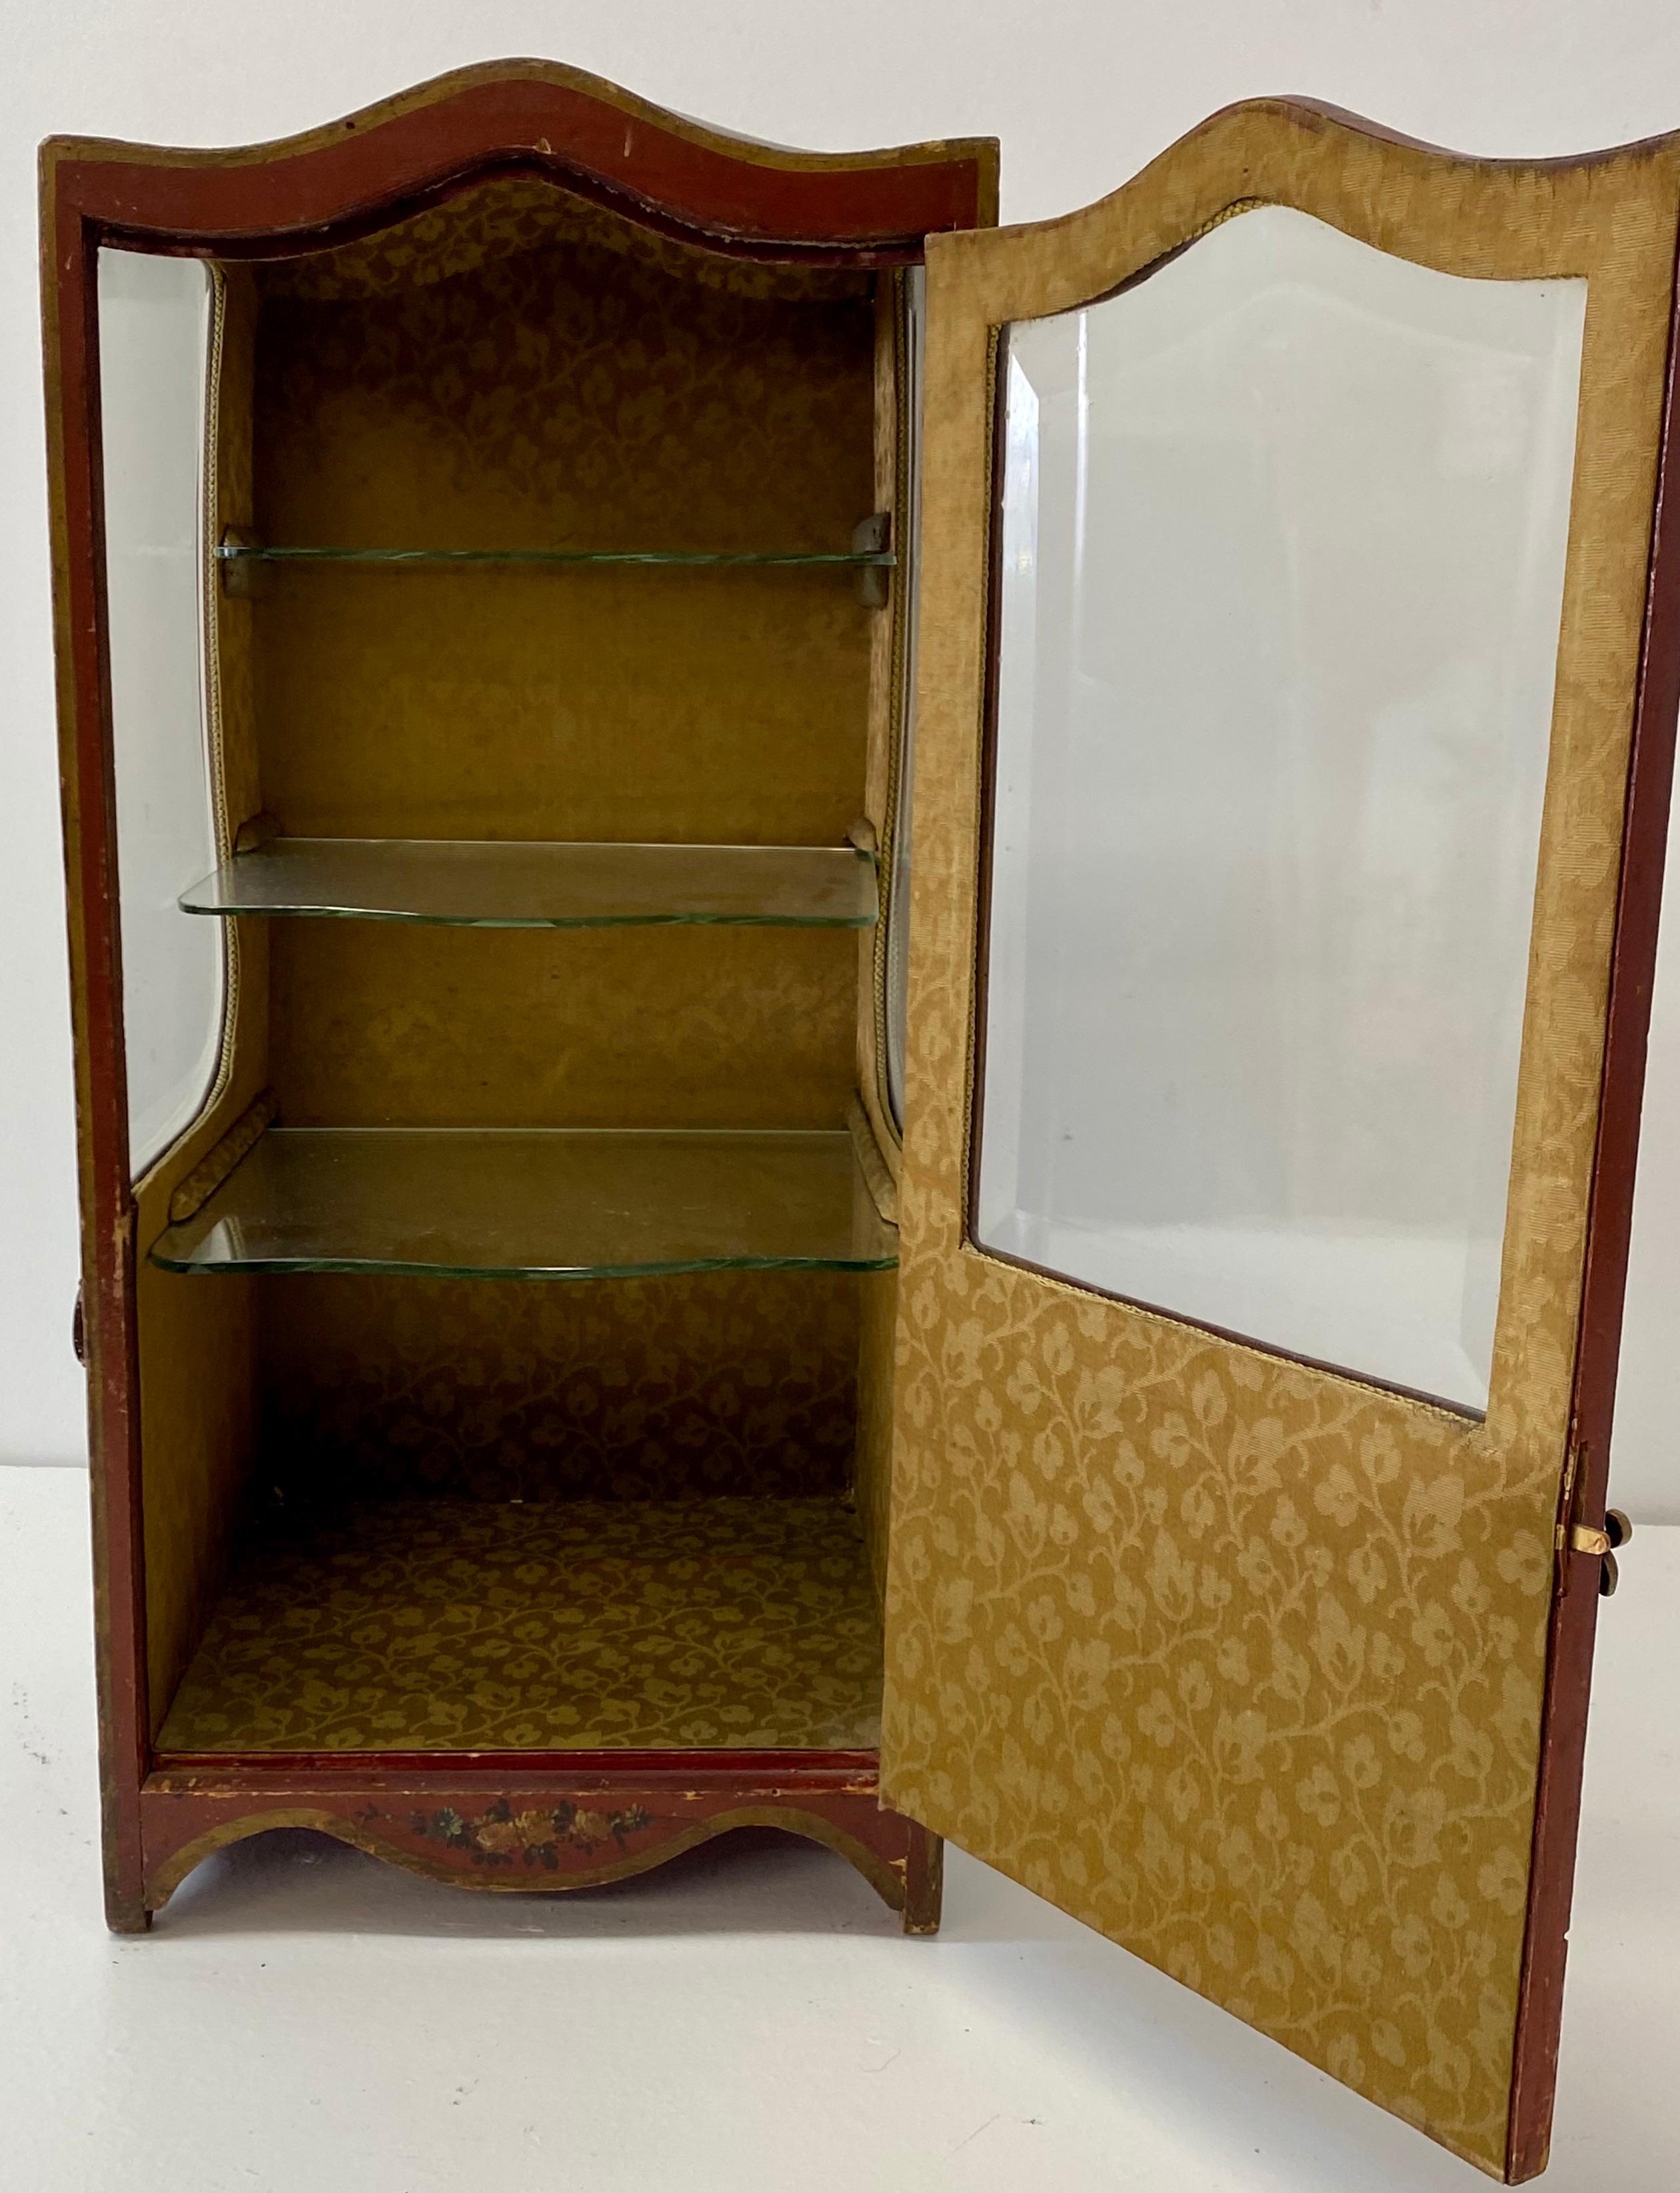 19th Century Late 19th to Early 20th Century Sedan Chair Miniature Table Top Display Cabinet For Sale